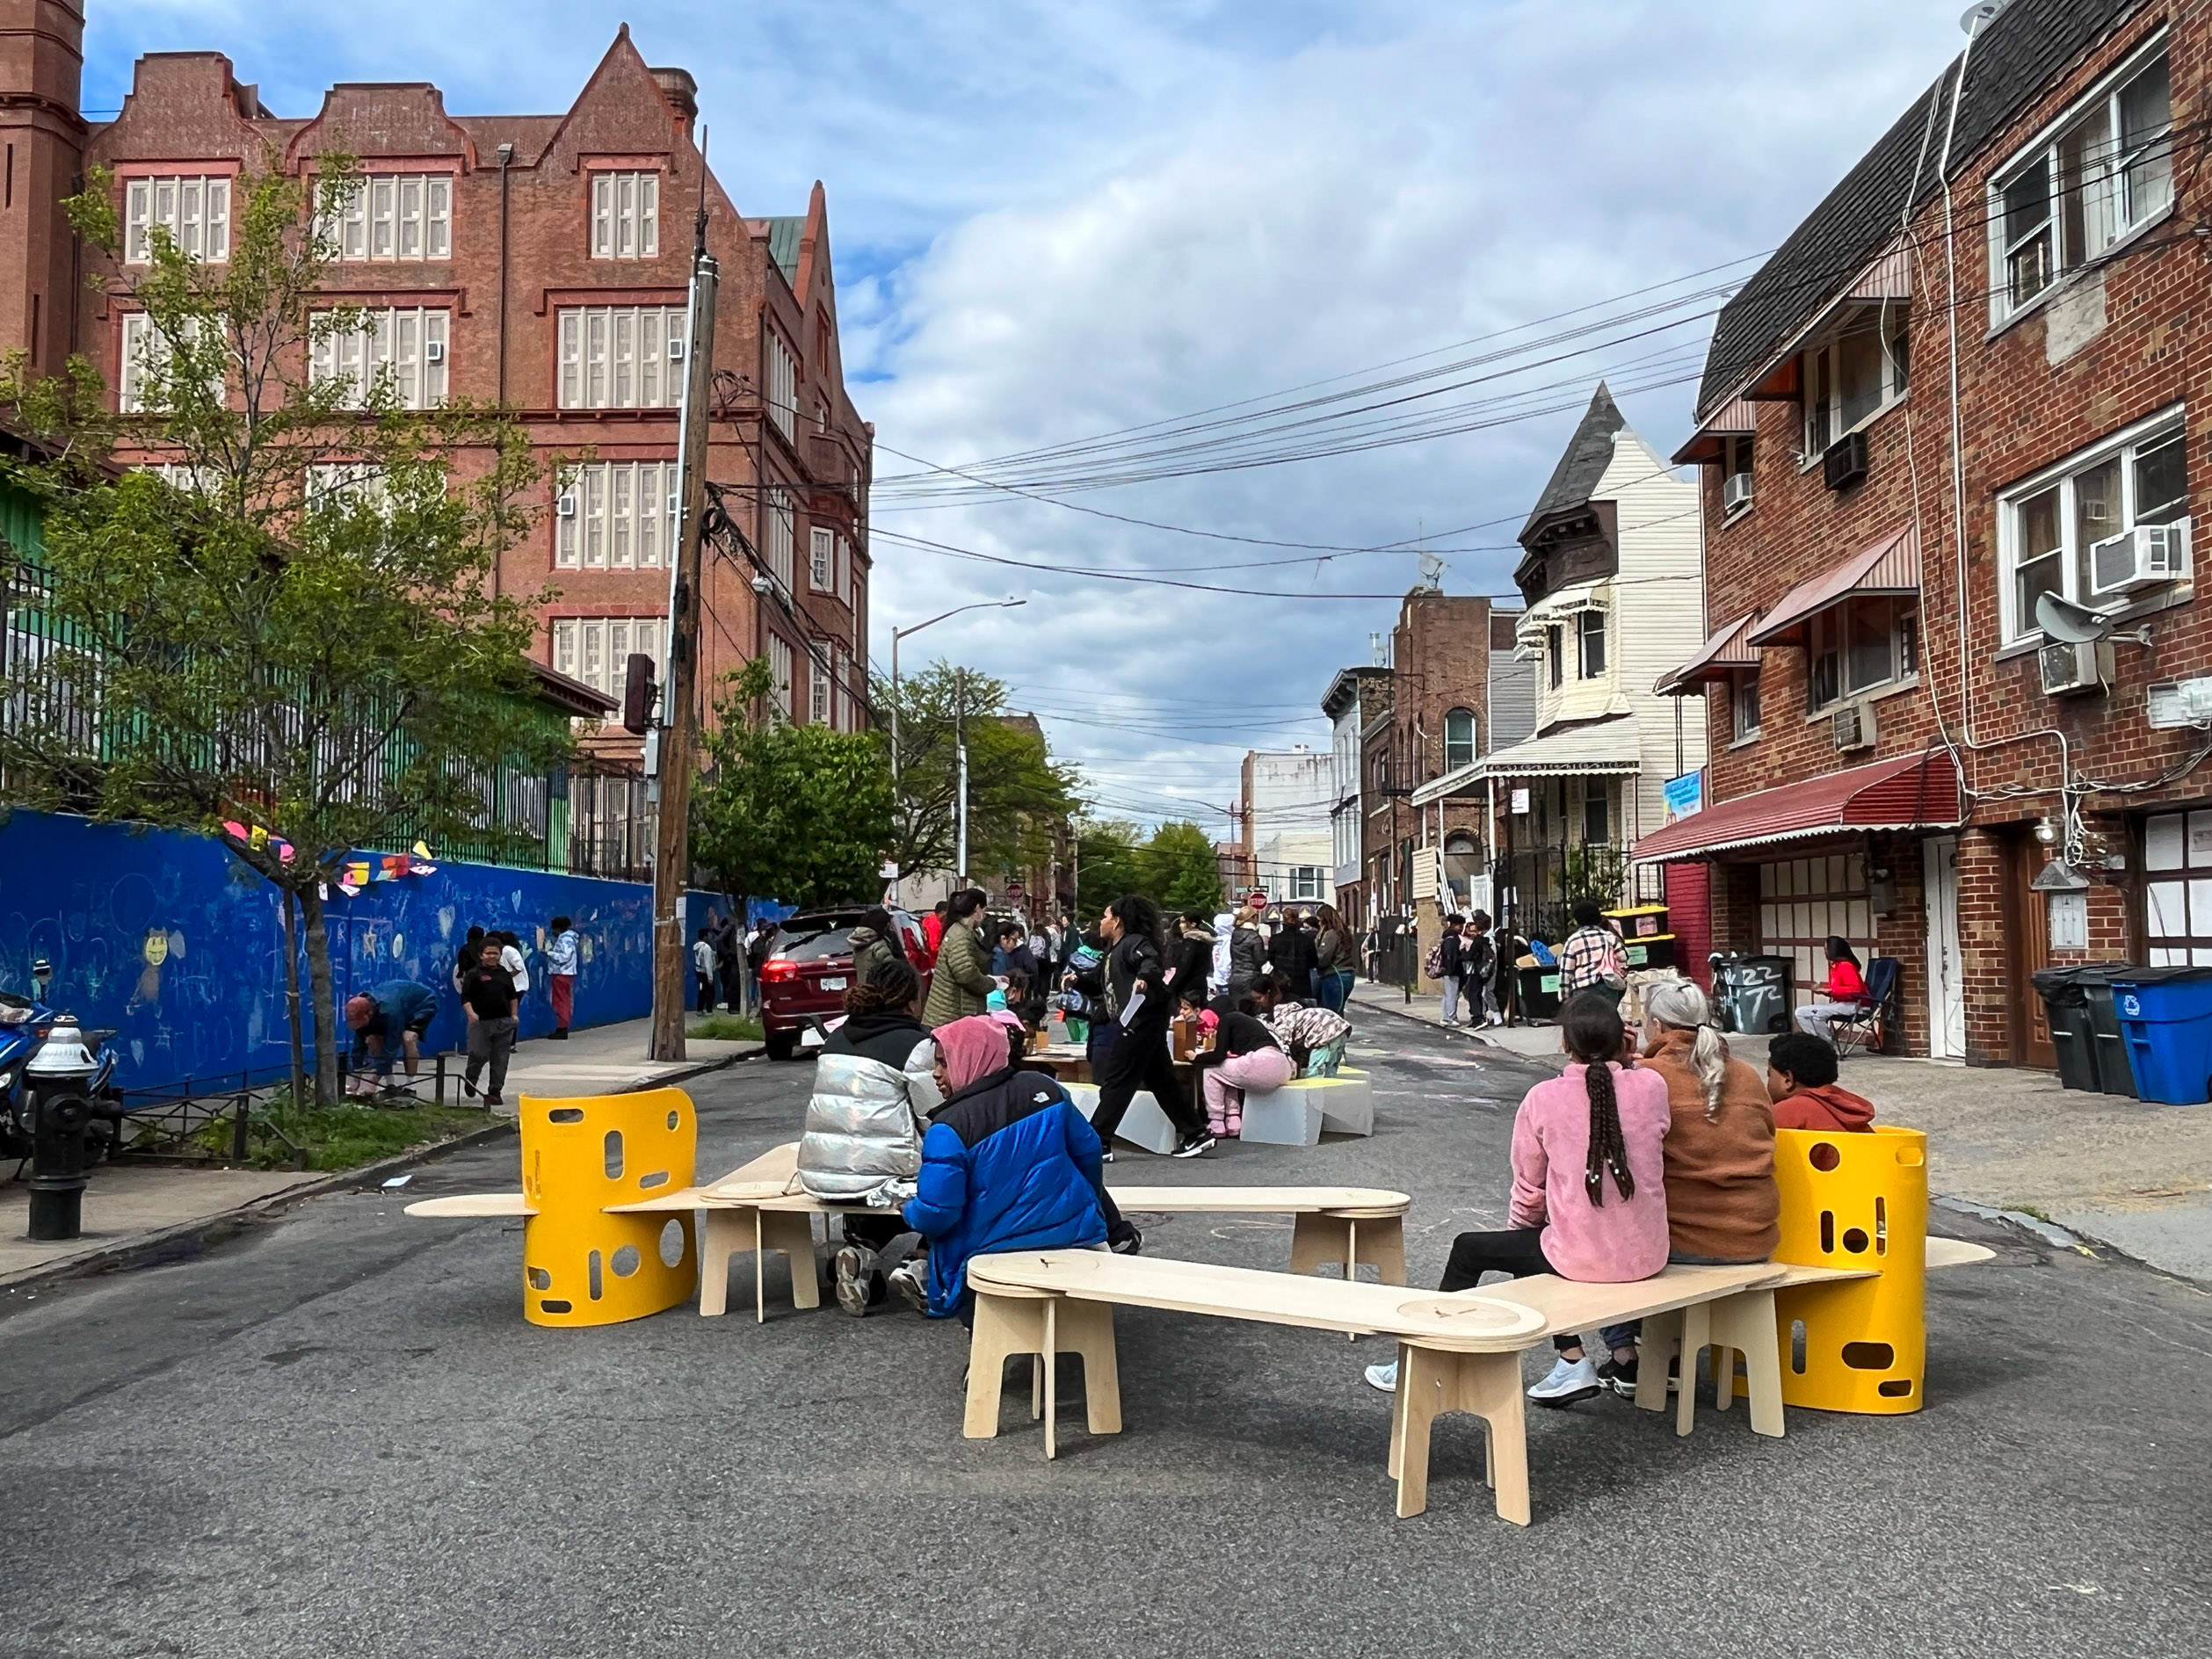 A view of children and adults sitting on a bench on an open street in nyc.